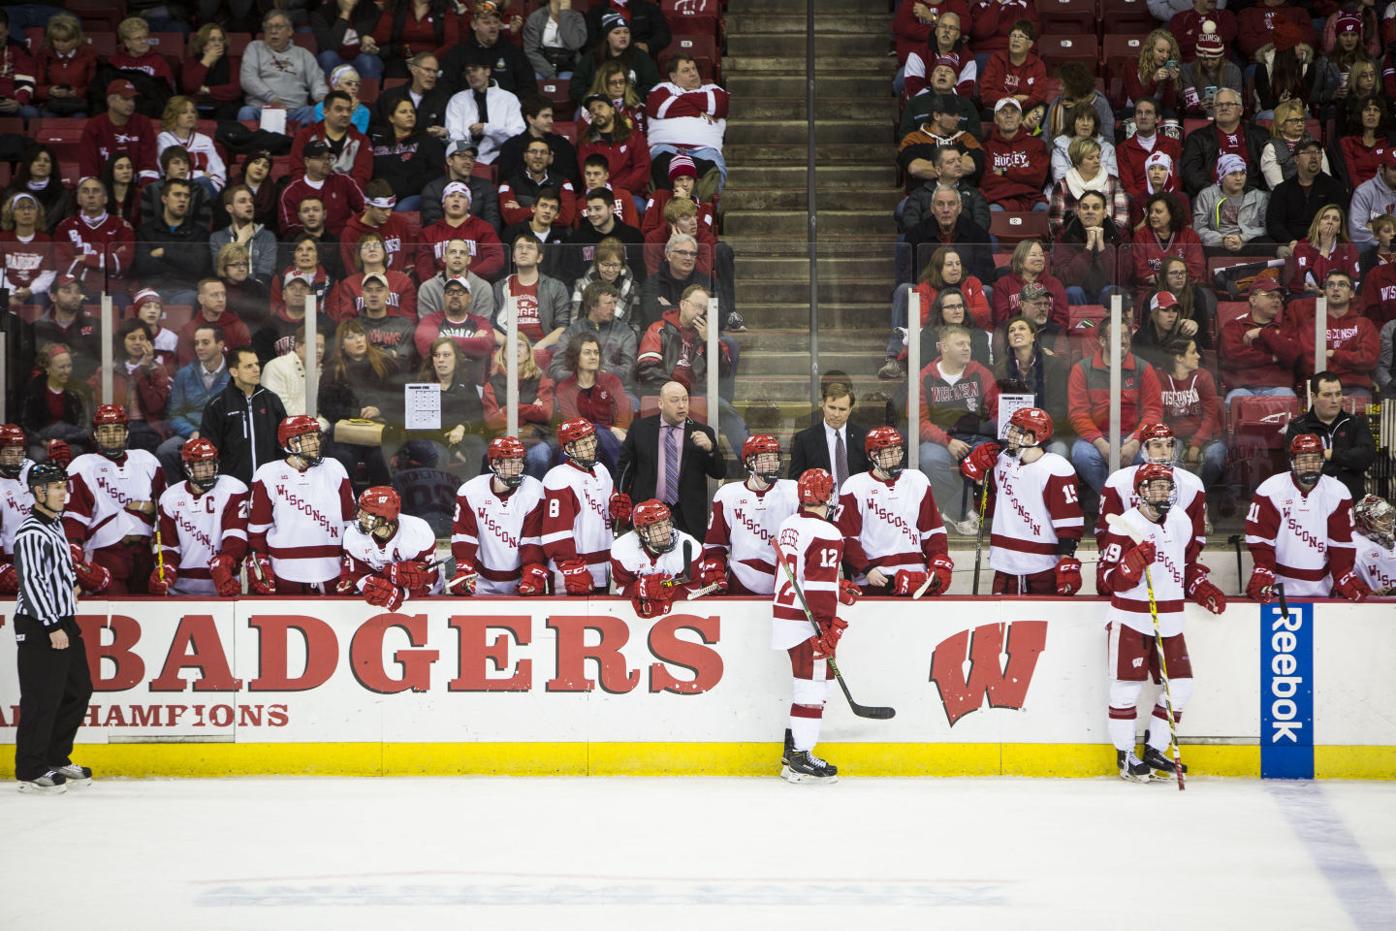 Questions facing the Gopher hockey program, beyond finding a new coach -  The Athletic